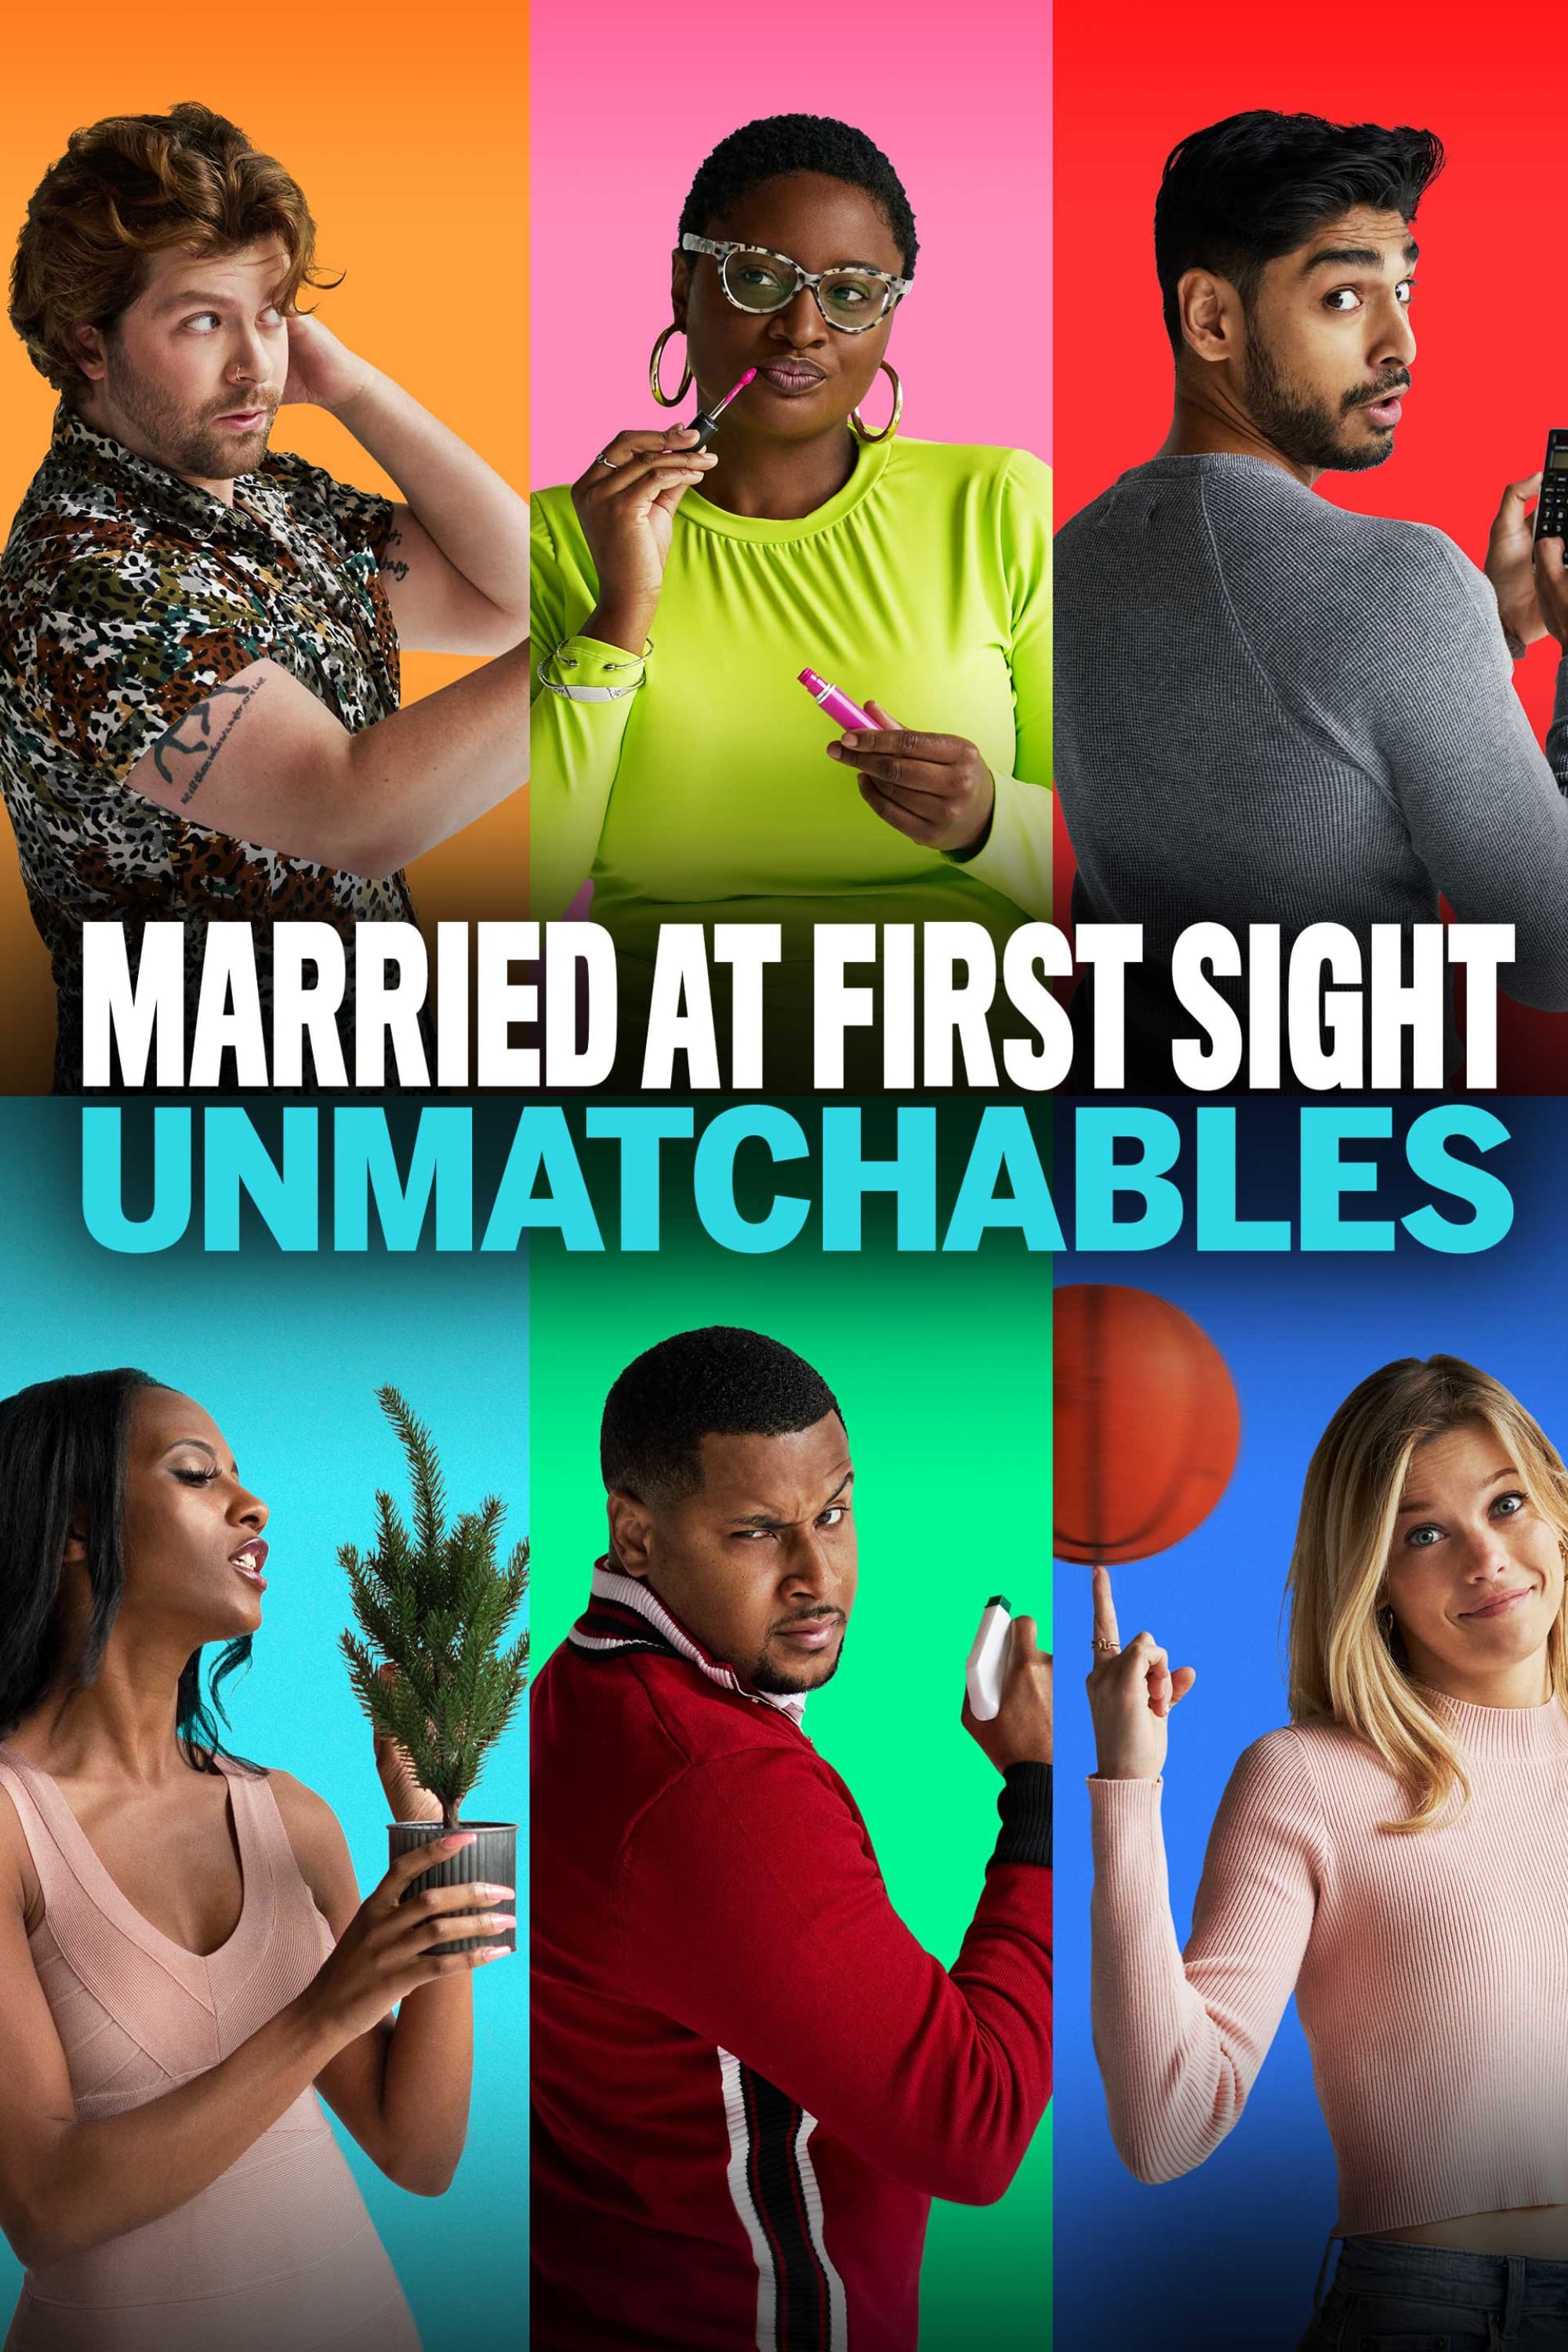 Married at First Sight: Unmatchables